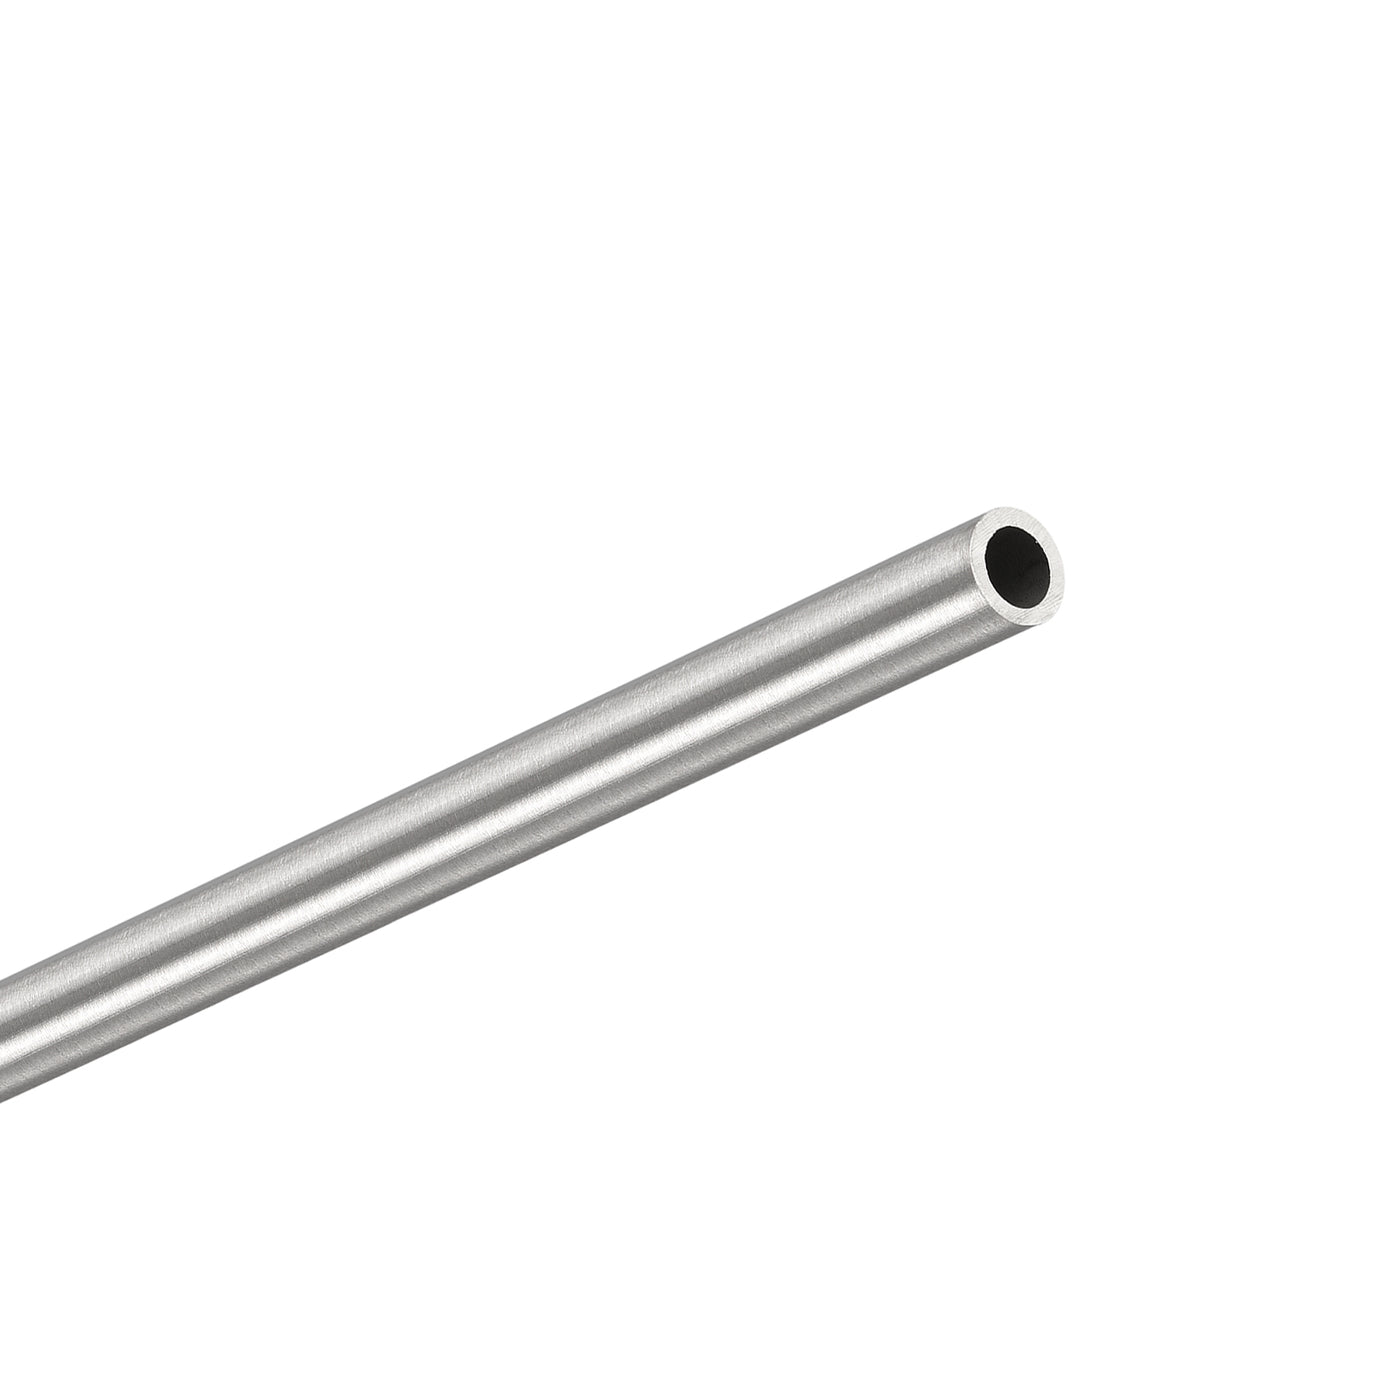 Uxcell Uxcell 304 Stainless Steel Round Tube 4mm OD 0.4mm Wall Thickness 300mm Length 4 Pcs